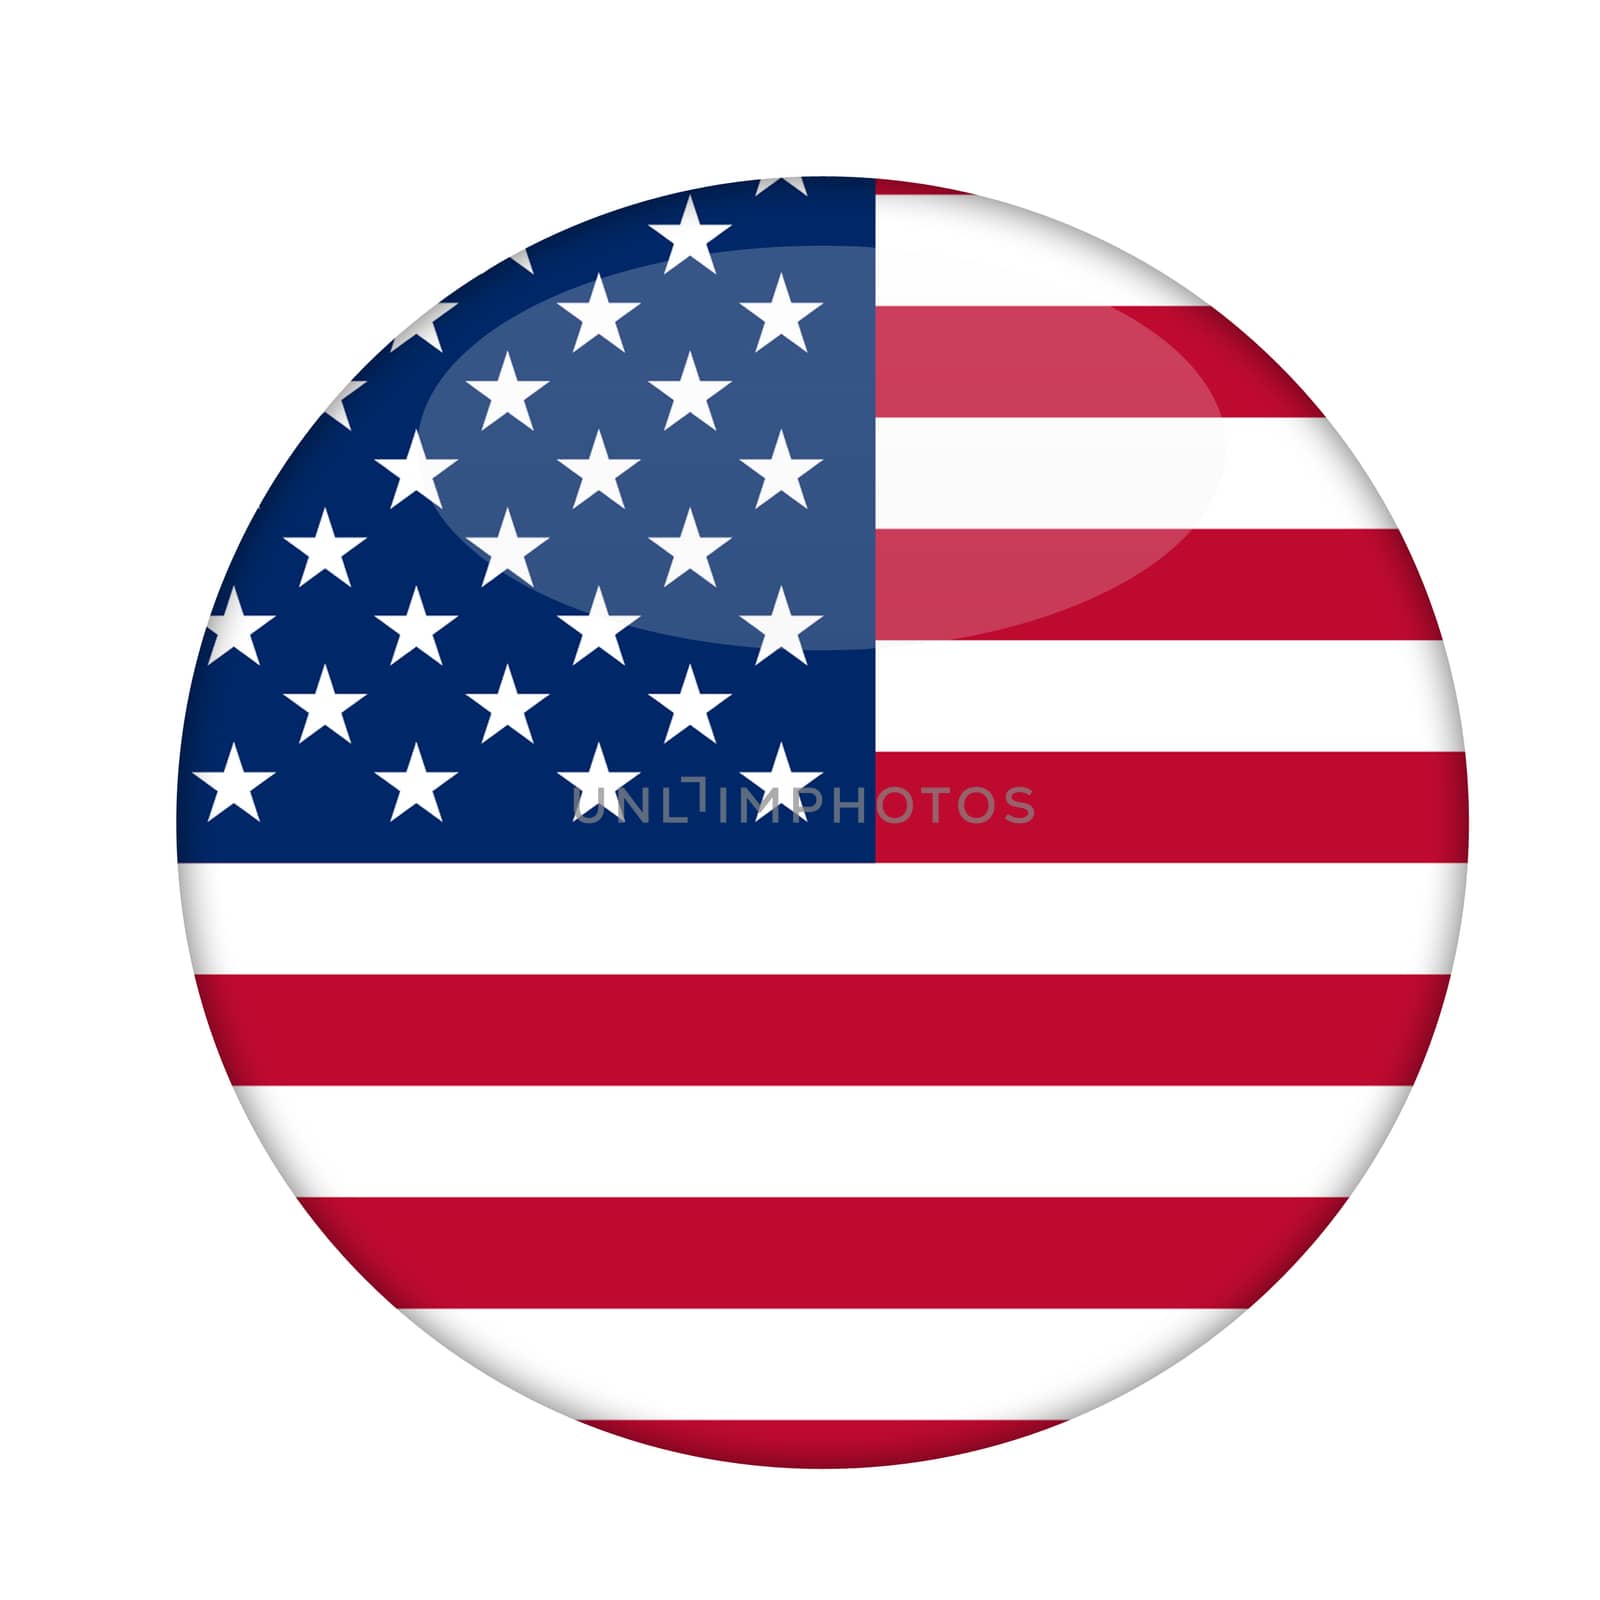 American Stars and Stripes badge isolated on a white background.